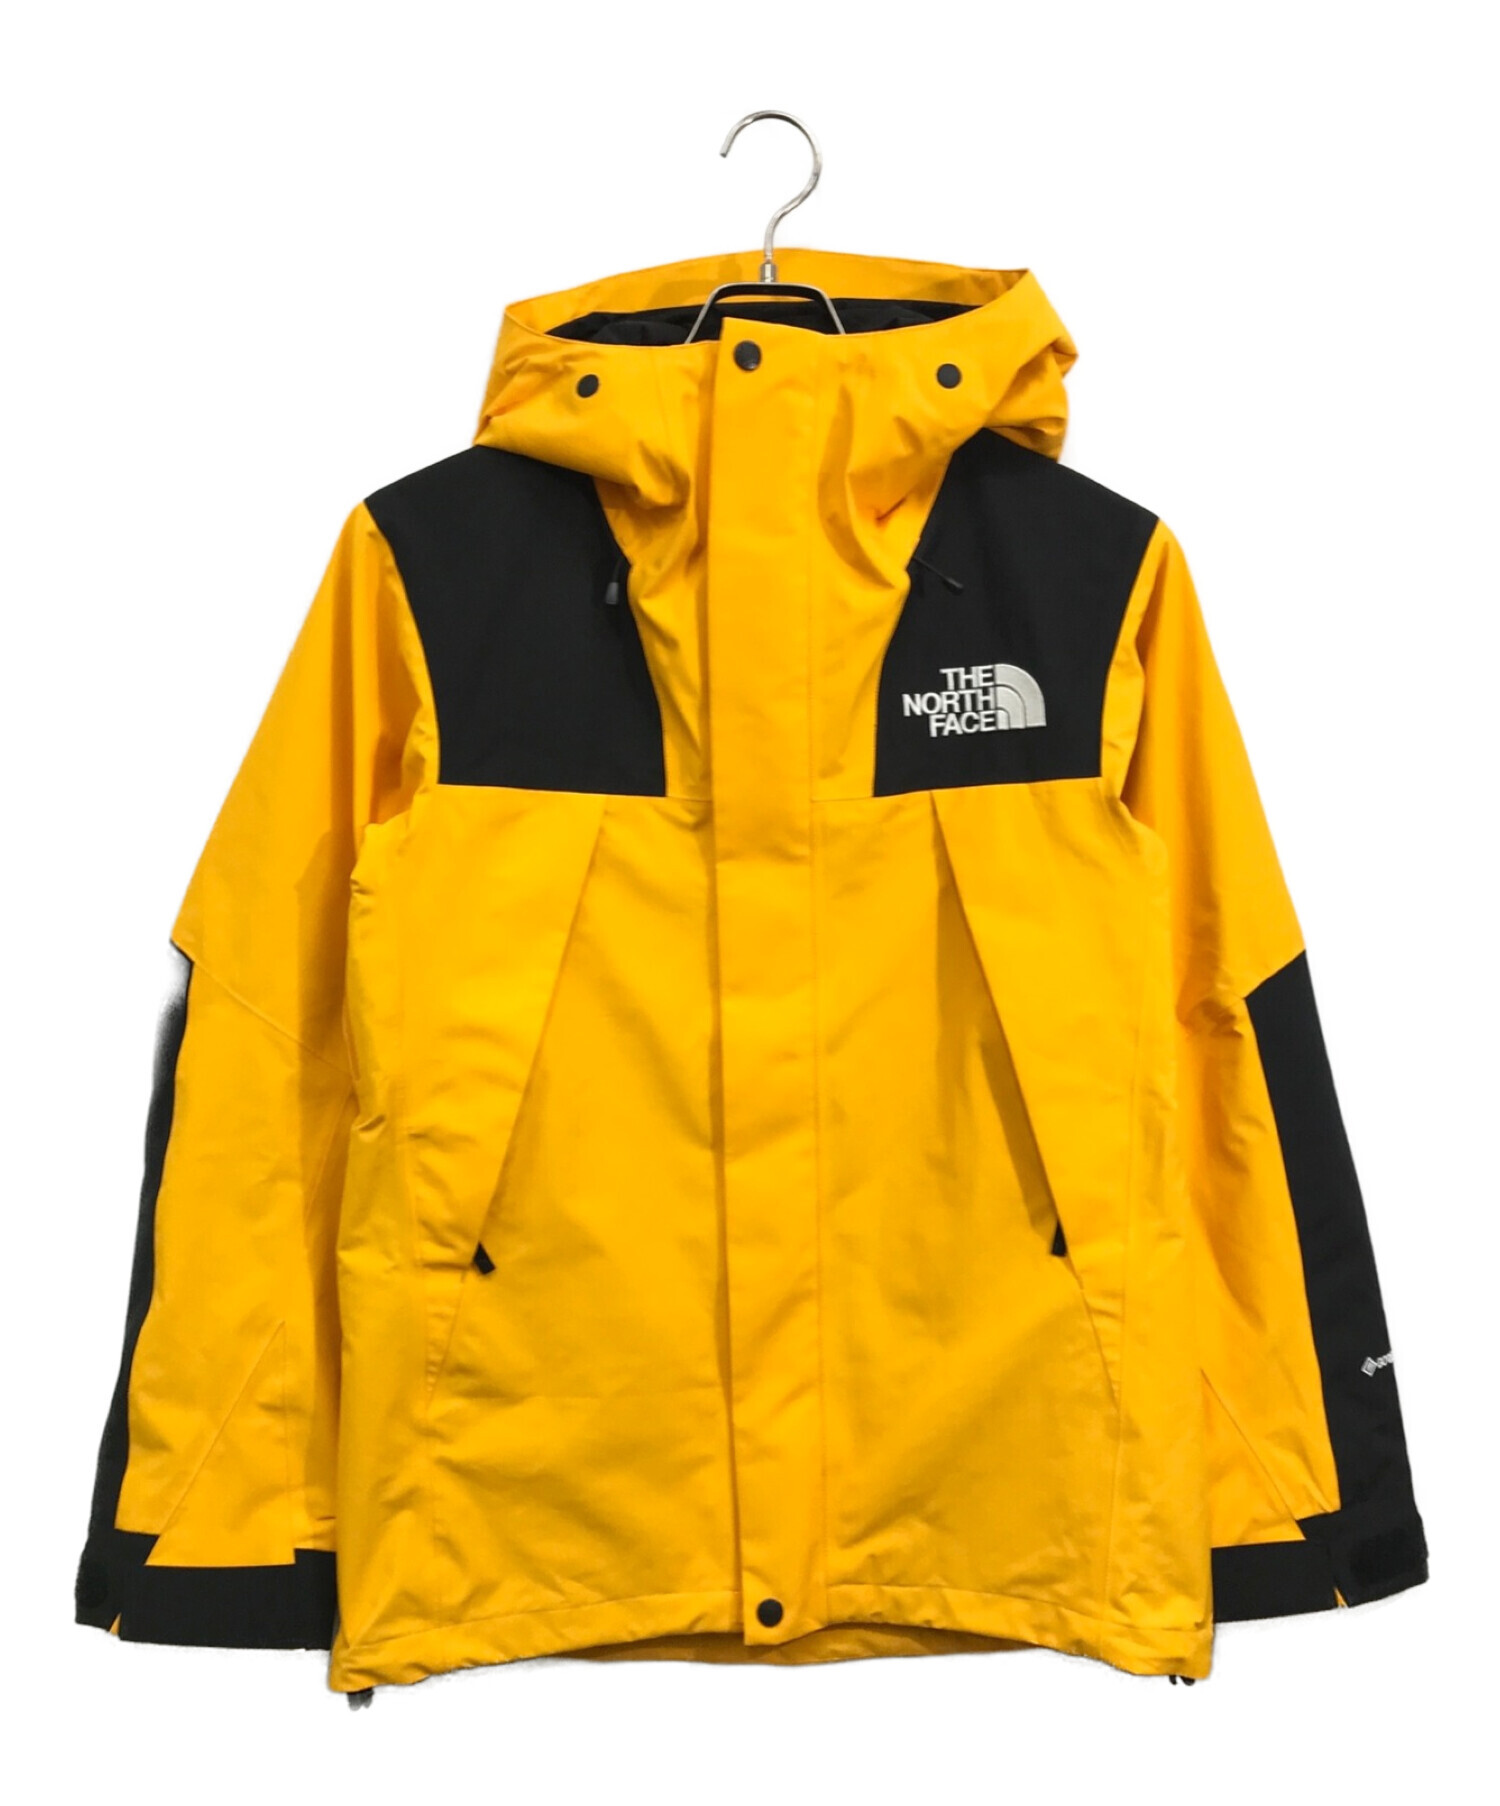 THE NORTH FACE  ナイロンジャケット　イエロー